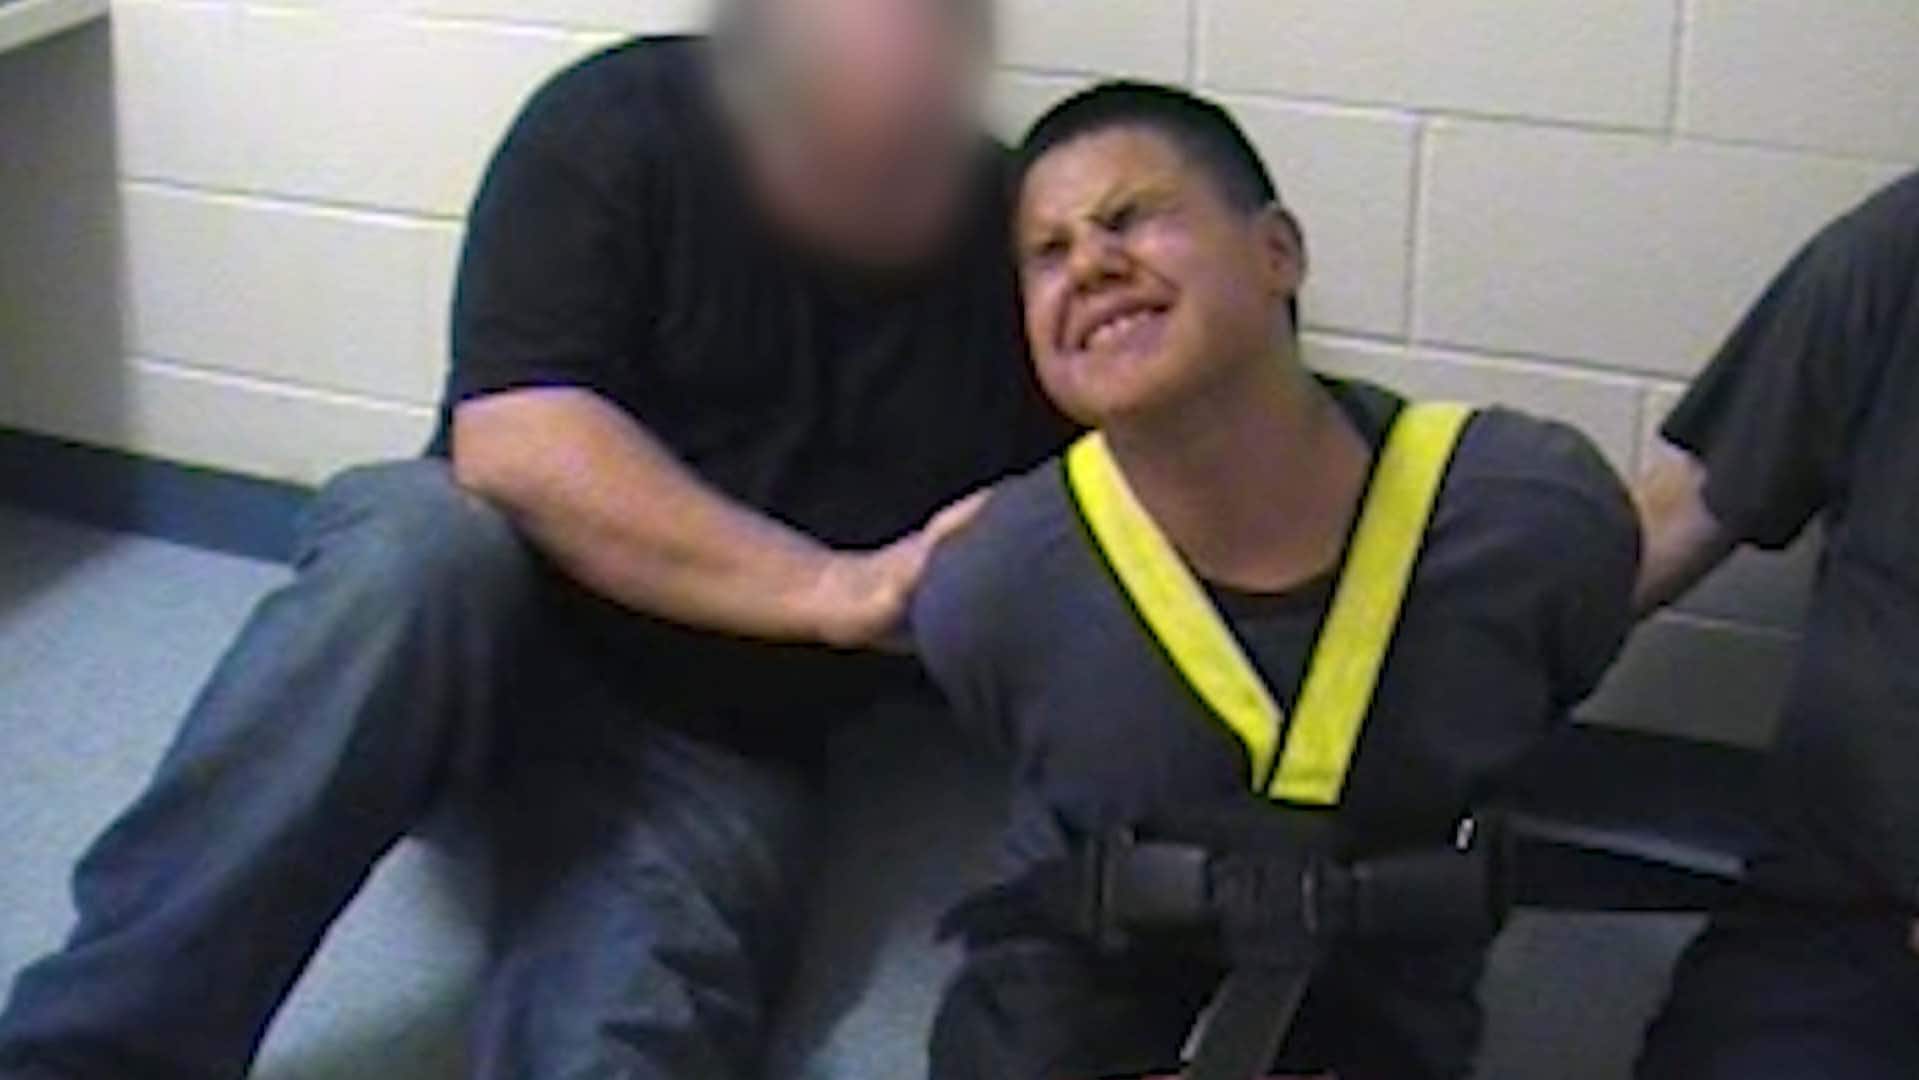 use of full body restraint while in youth detention left me broken sask man says